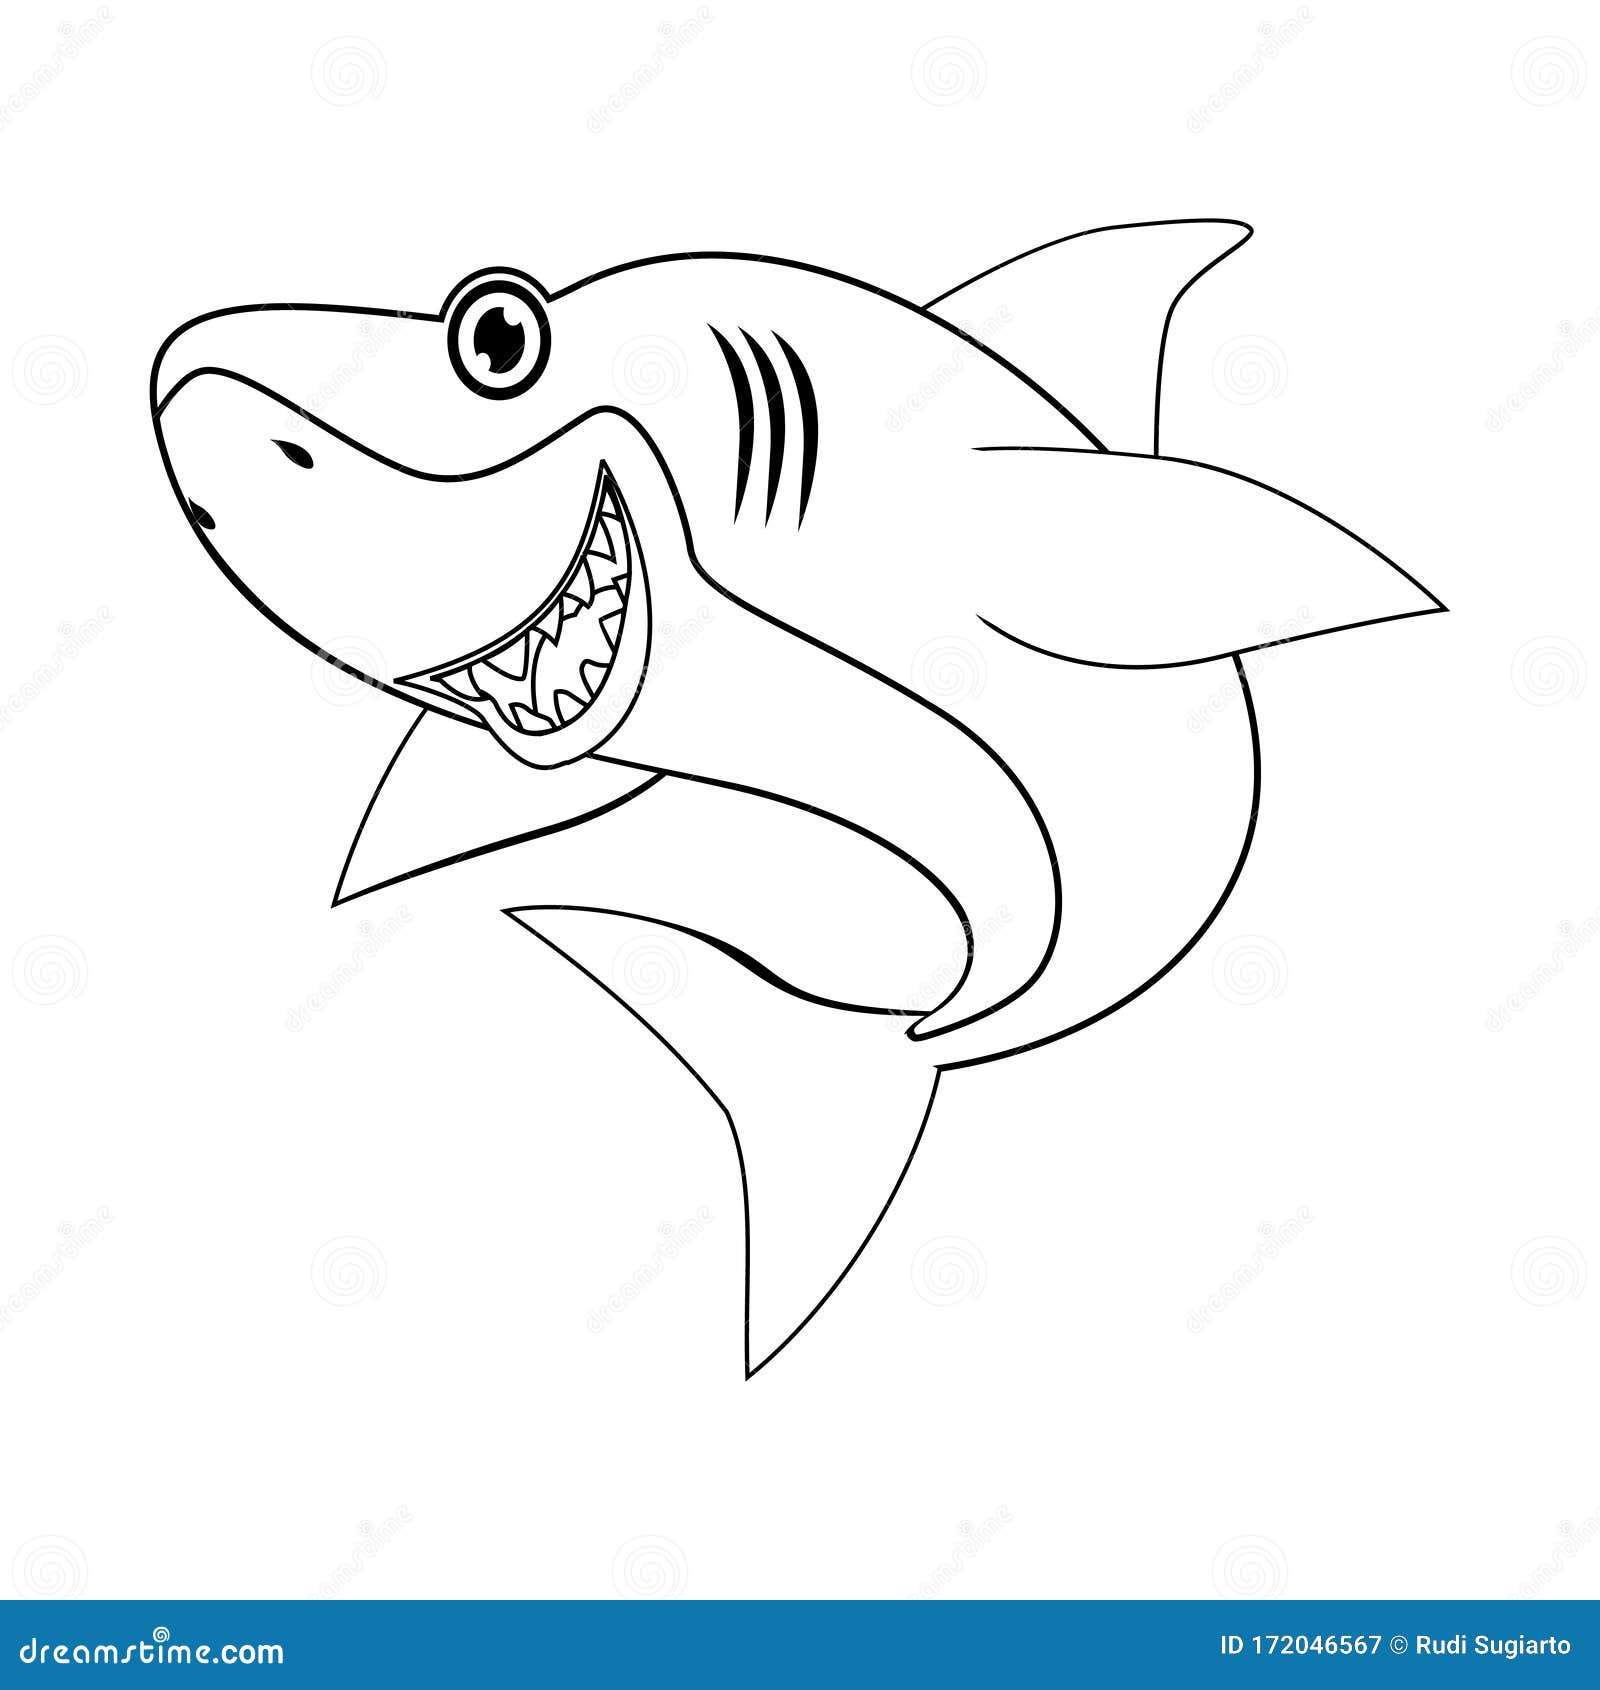 Coloring Page Shark Stock Illustrations – 20 Coloring Page Shark ...